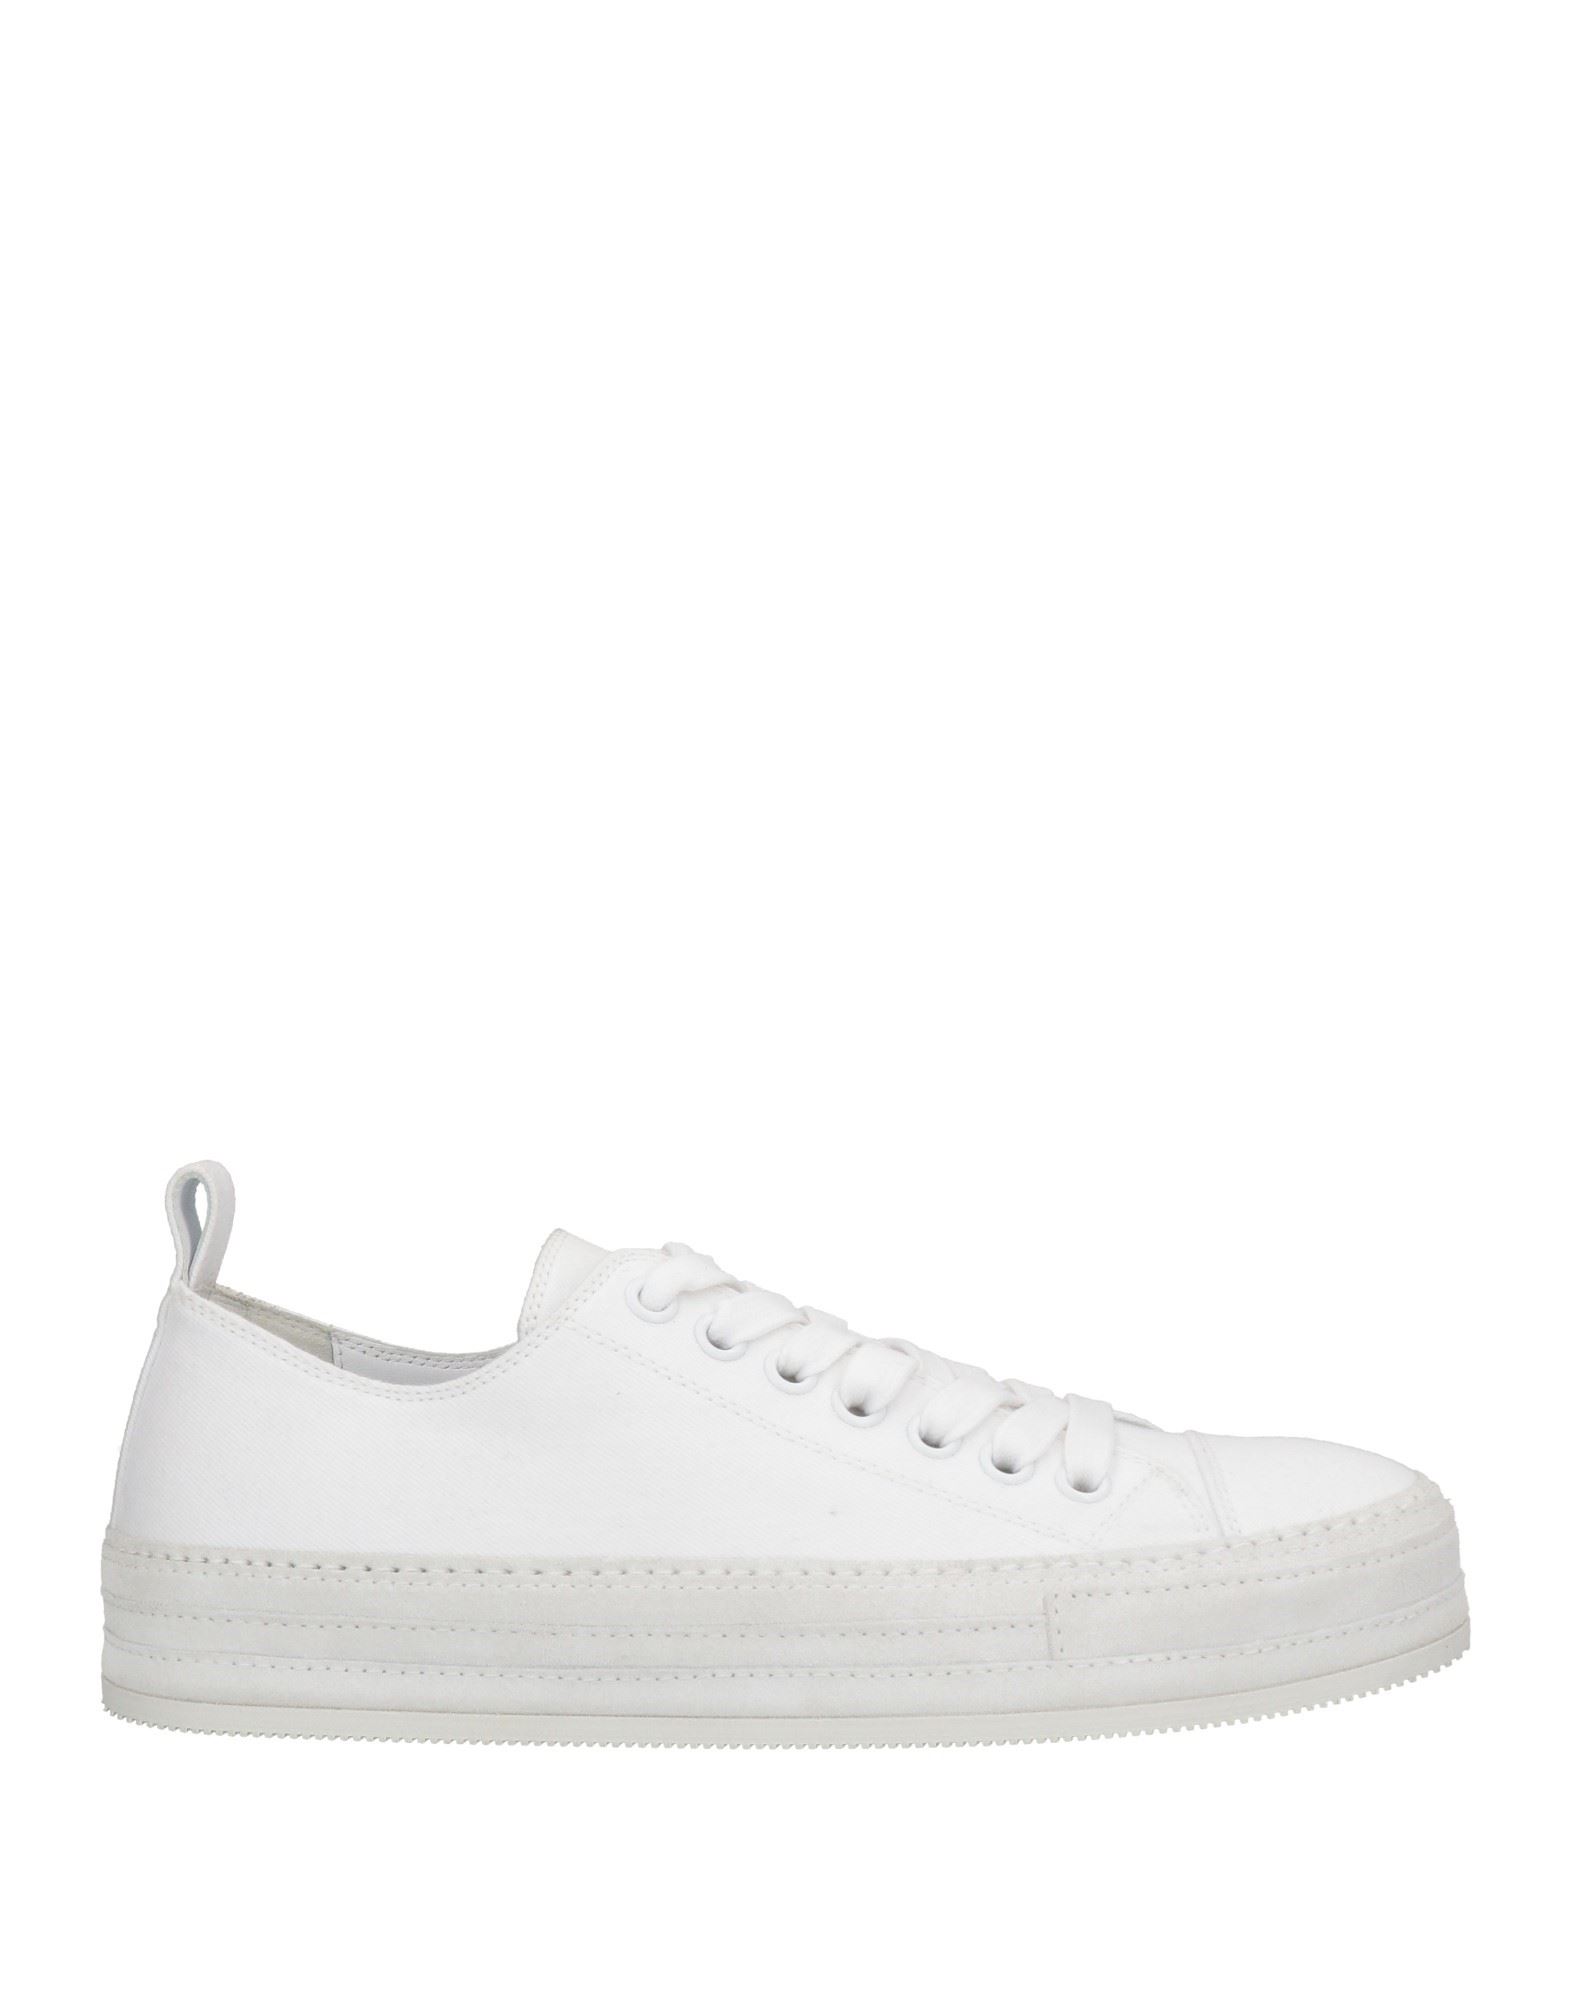 Shop Ann Demeulemeester Man Sneakers Off White Size 8.5 Soft Leather, Textile Fibers